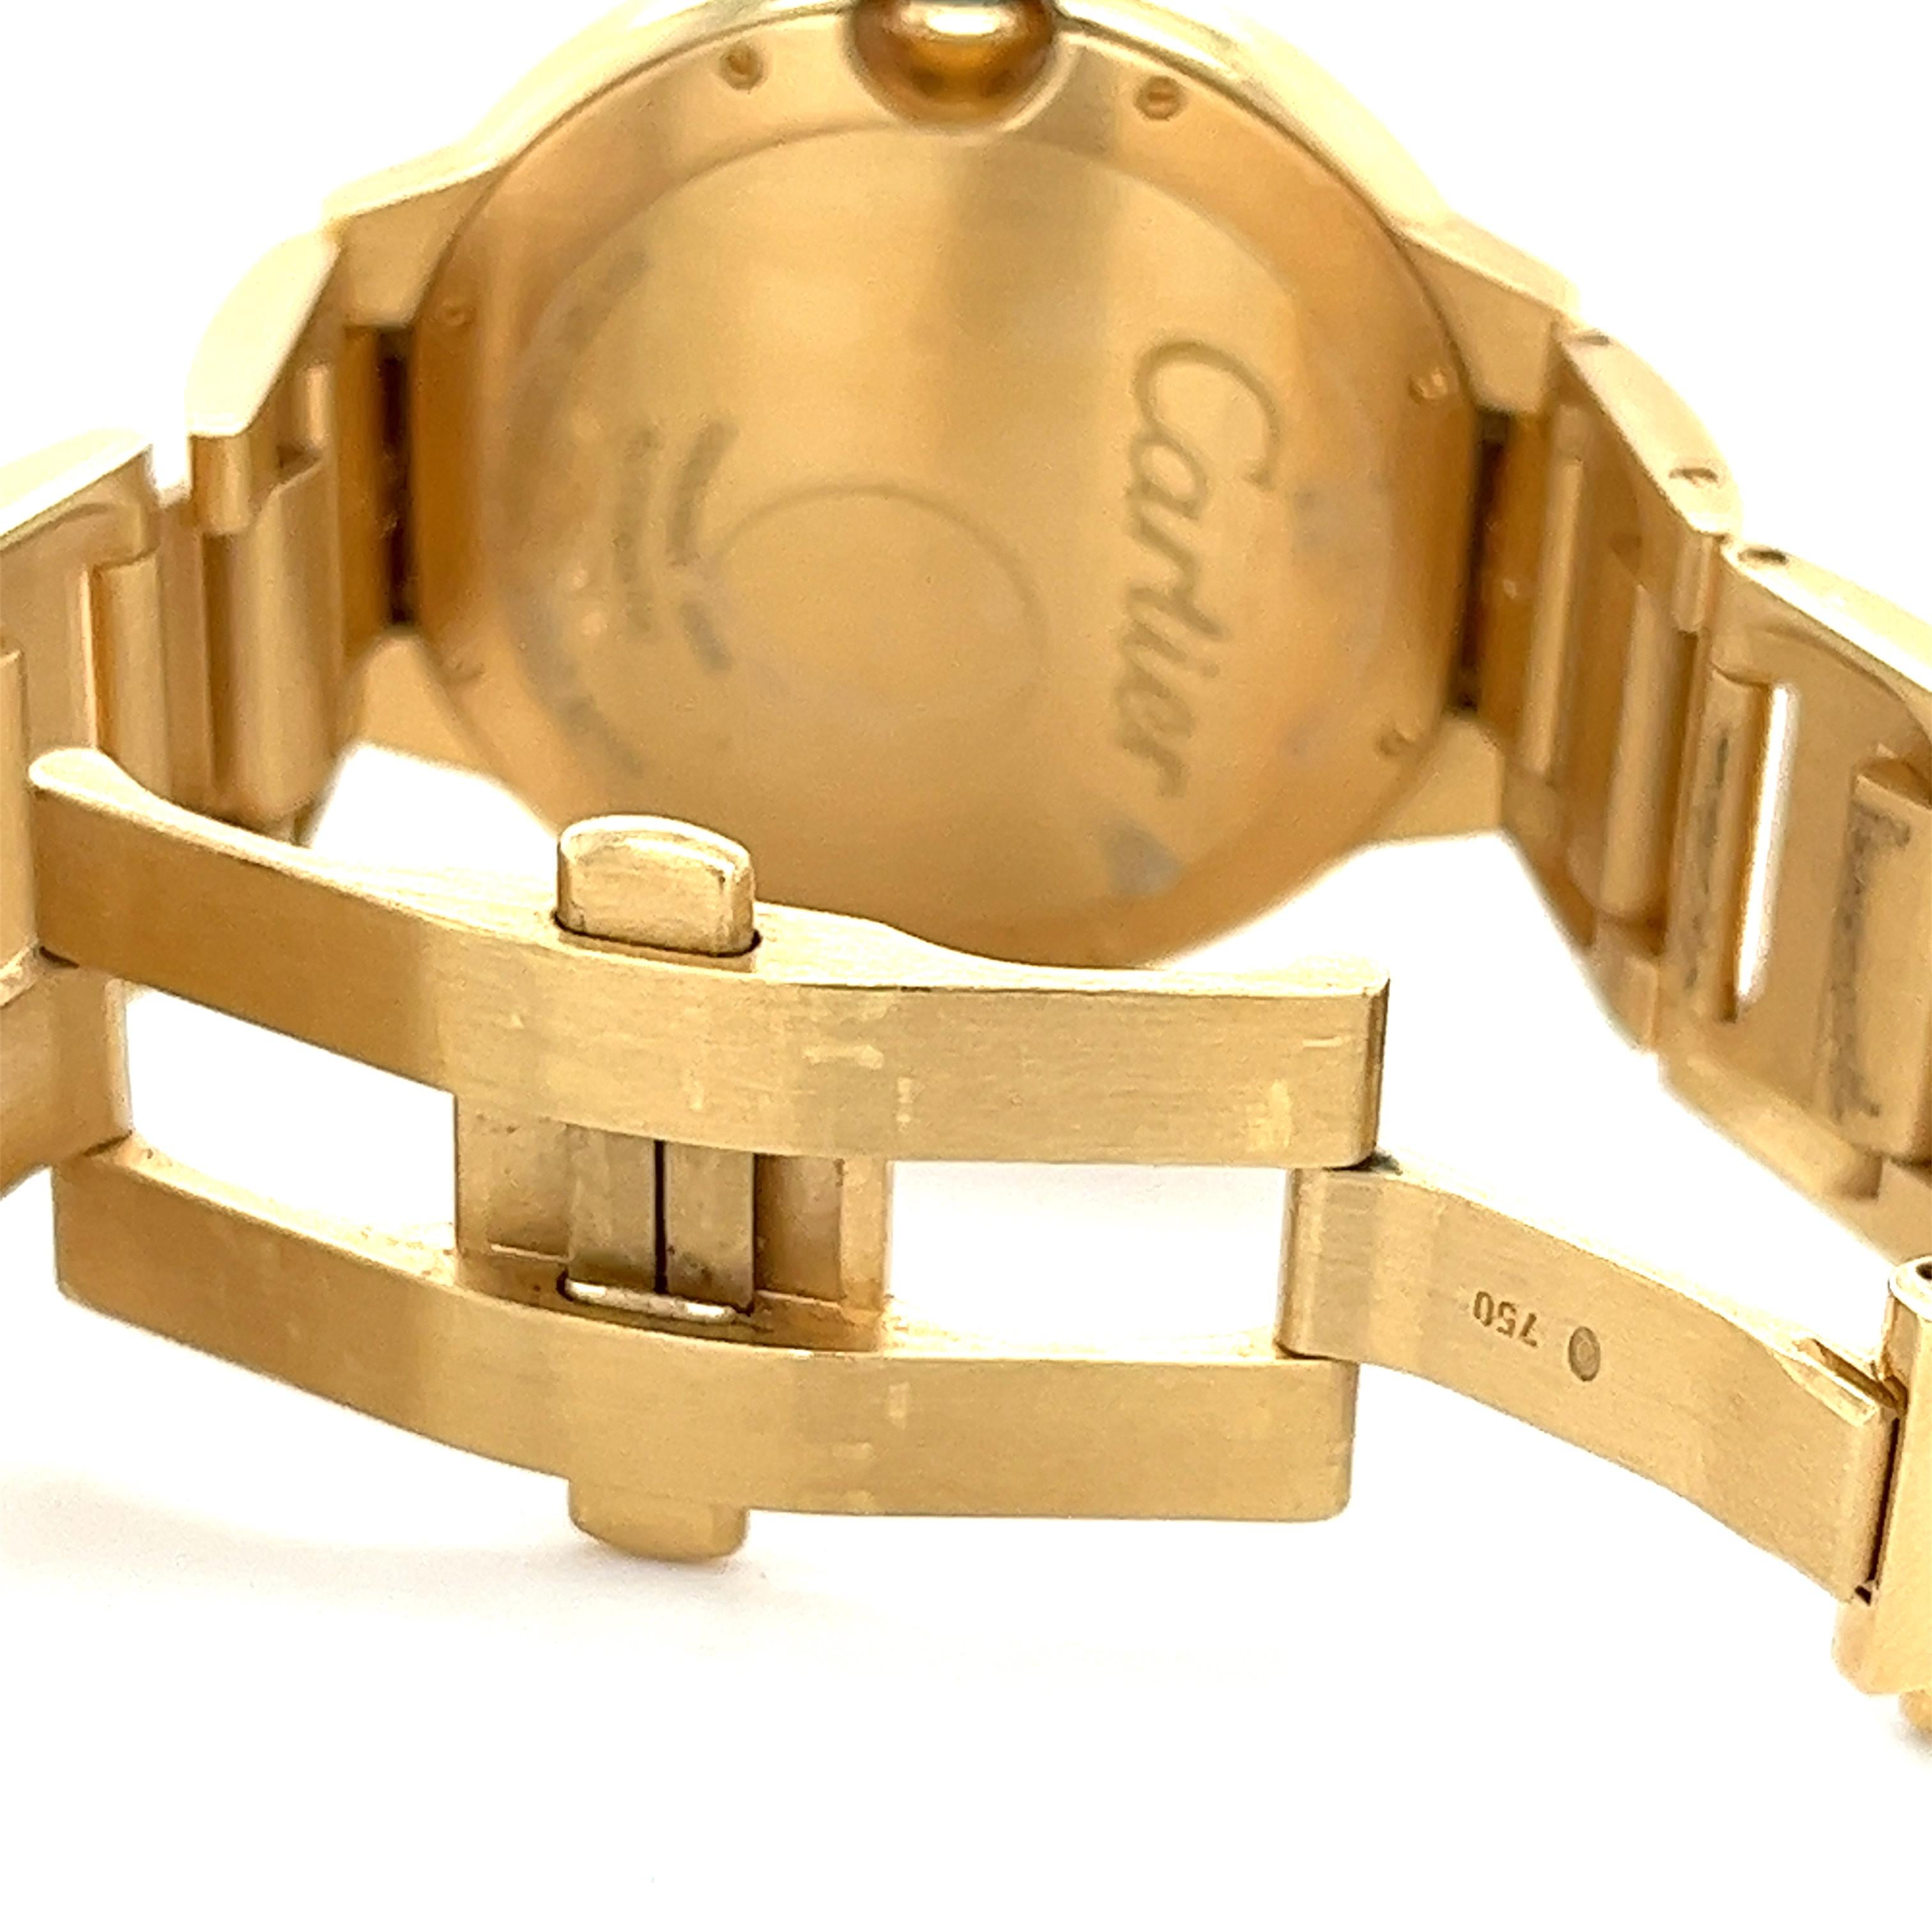 Cartier Ballon Bleu Jumbo Large Size Mens Watch in 18k Gold with Box/Papers en vente 5